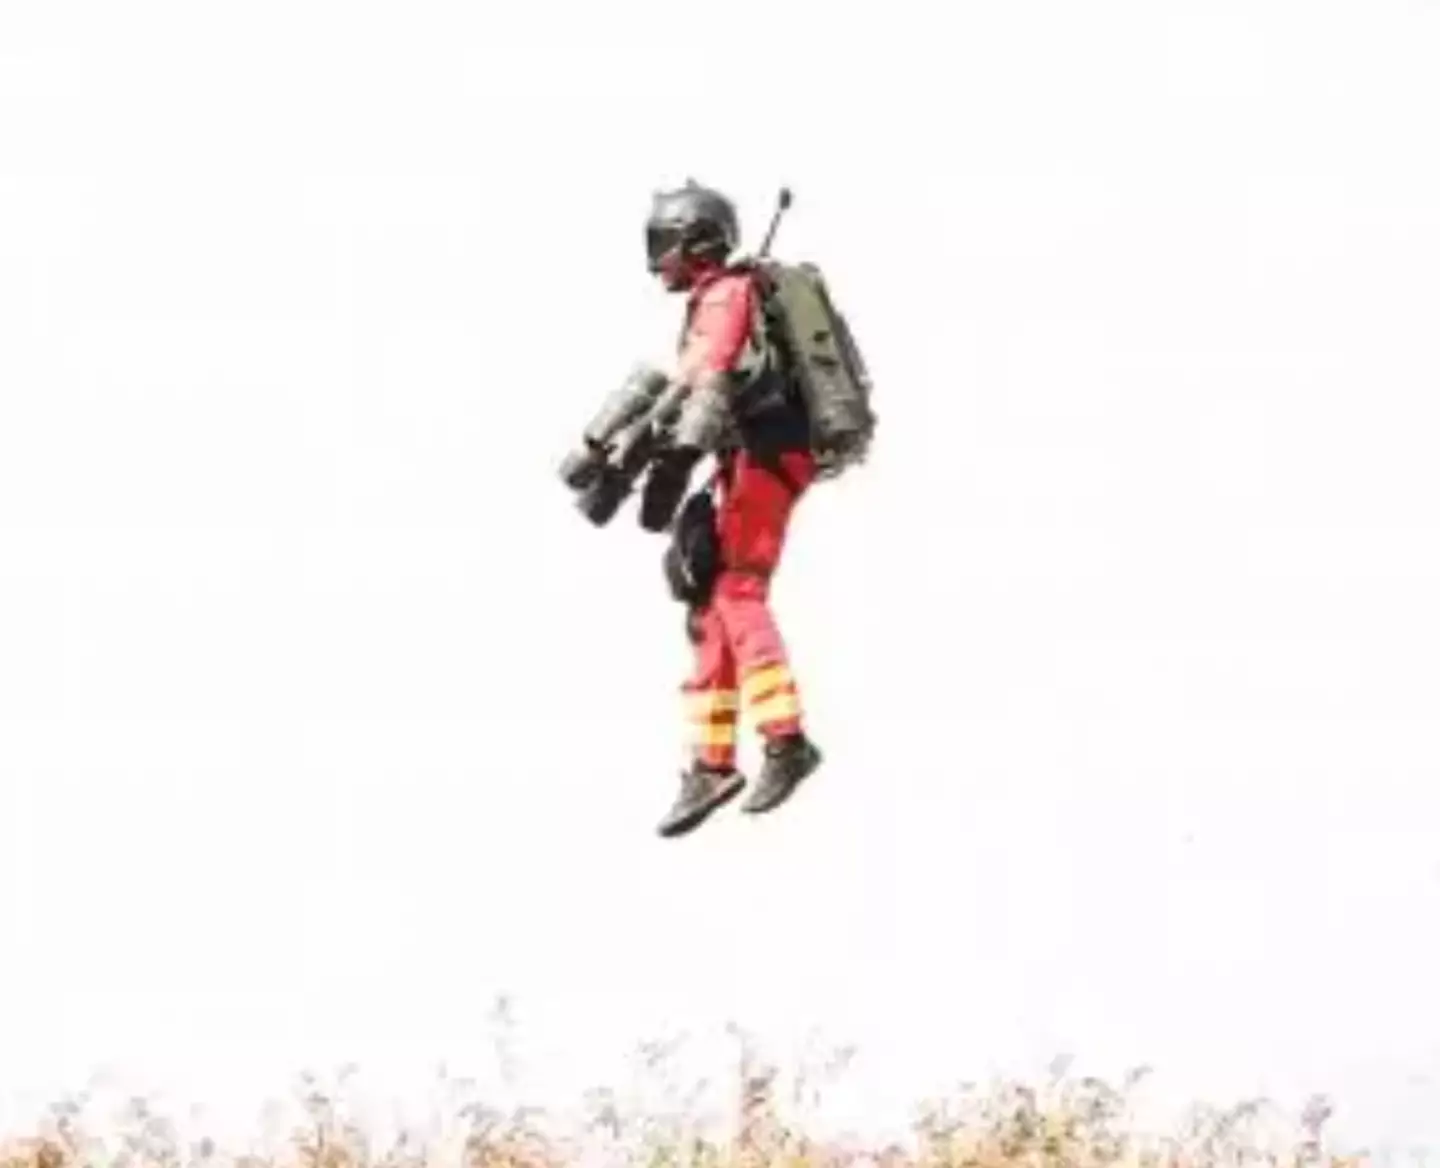 The Jet Pack increases response time for paramedics.